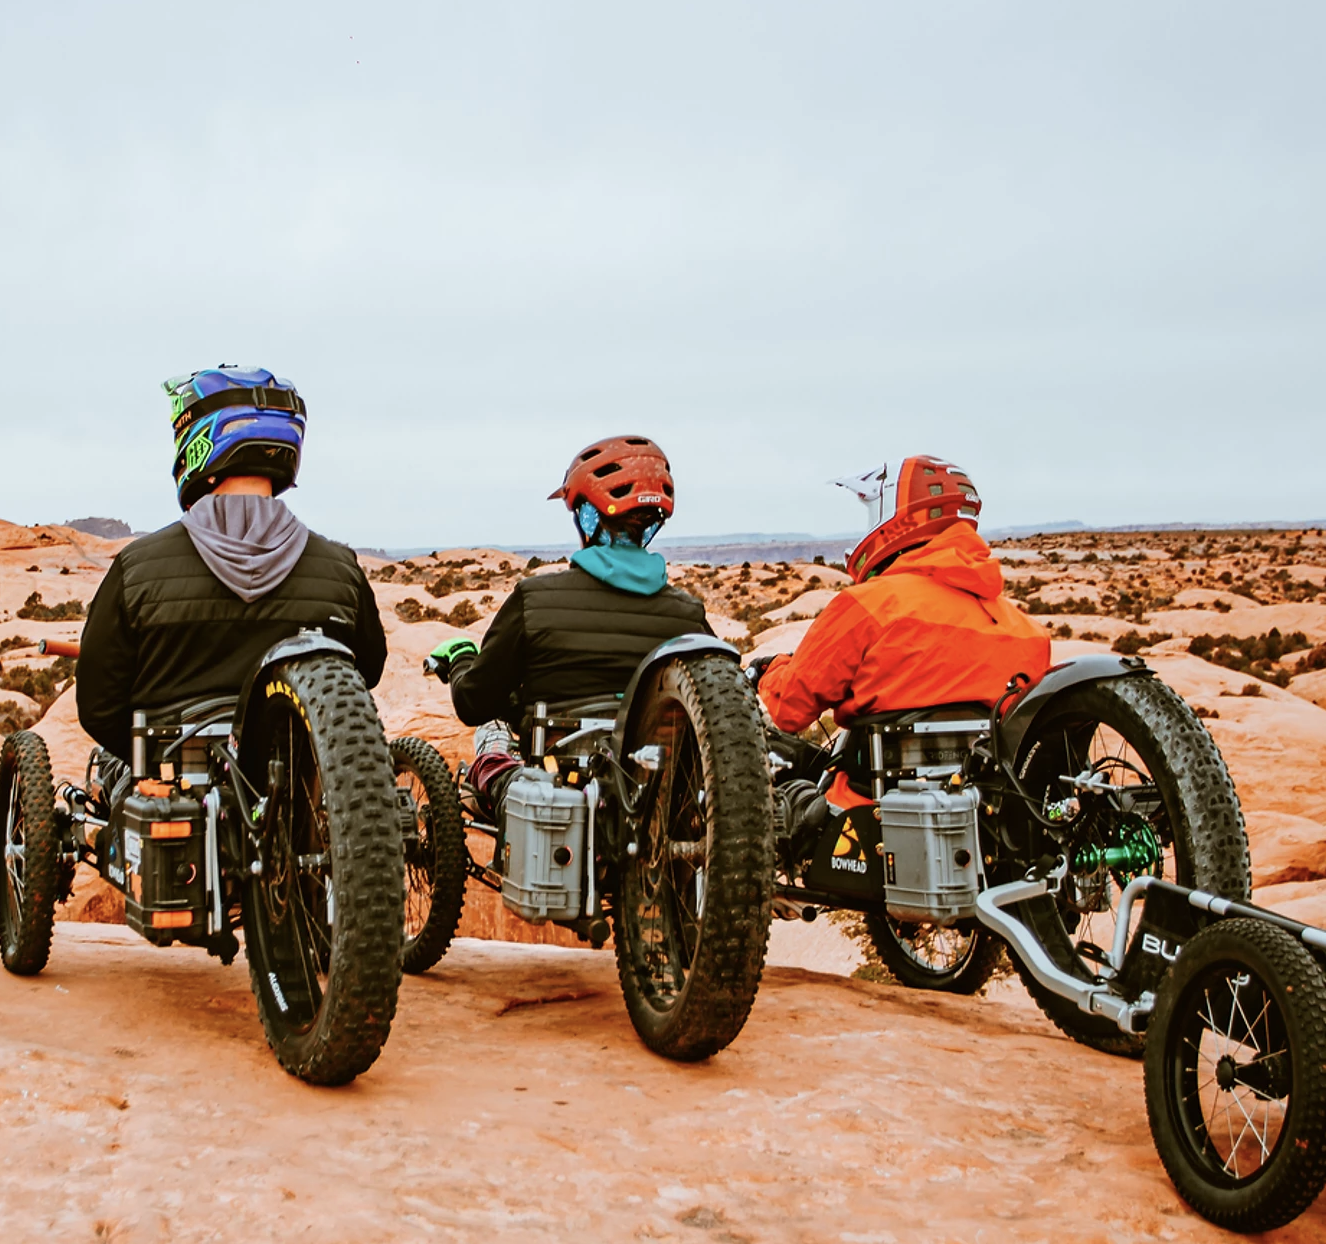 3 dudes on adaptive bikes sit on a sandy hill overlooking a view